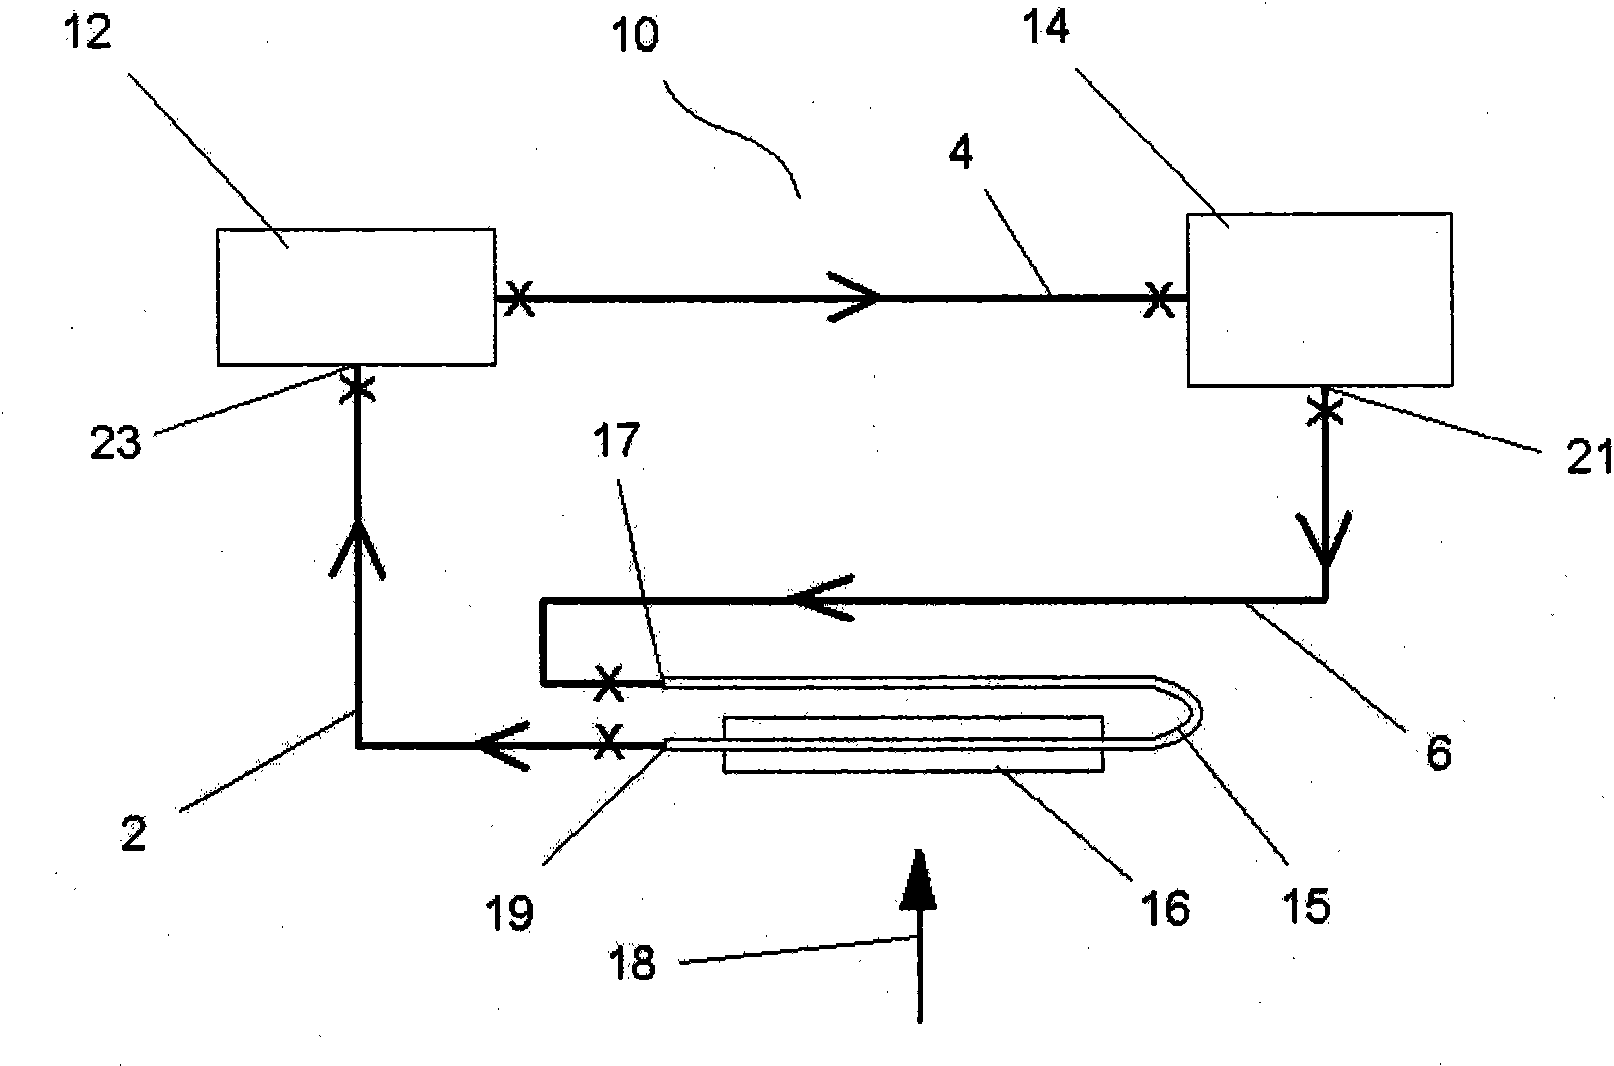 Thermal transfer apparatus, system and method